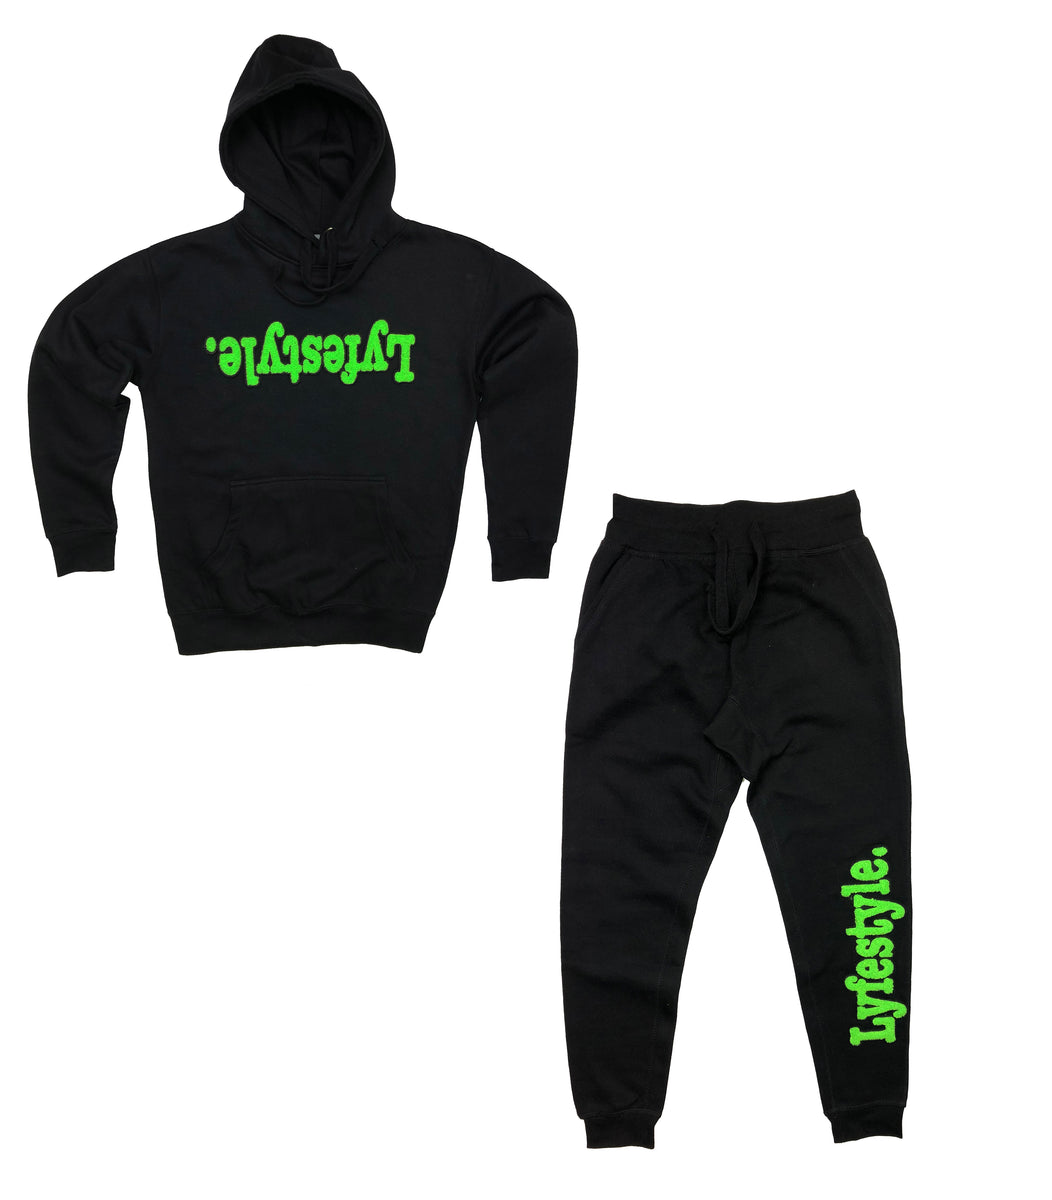 lime green jogging suit